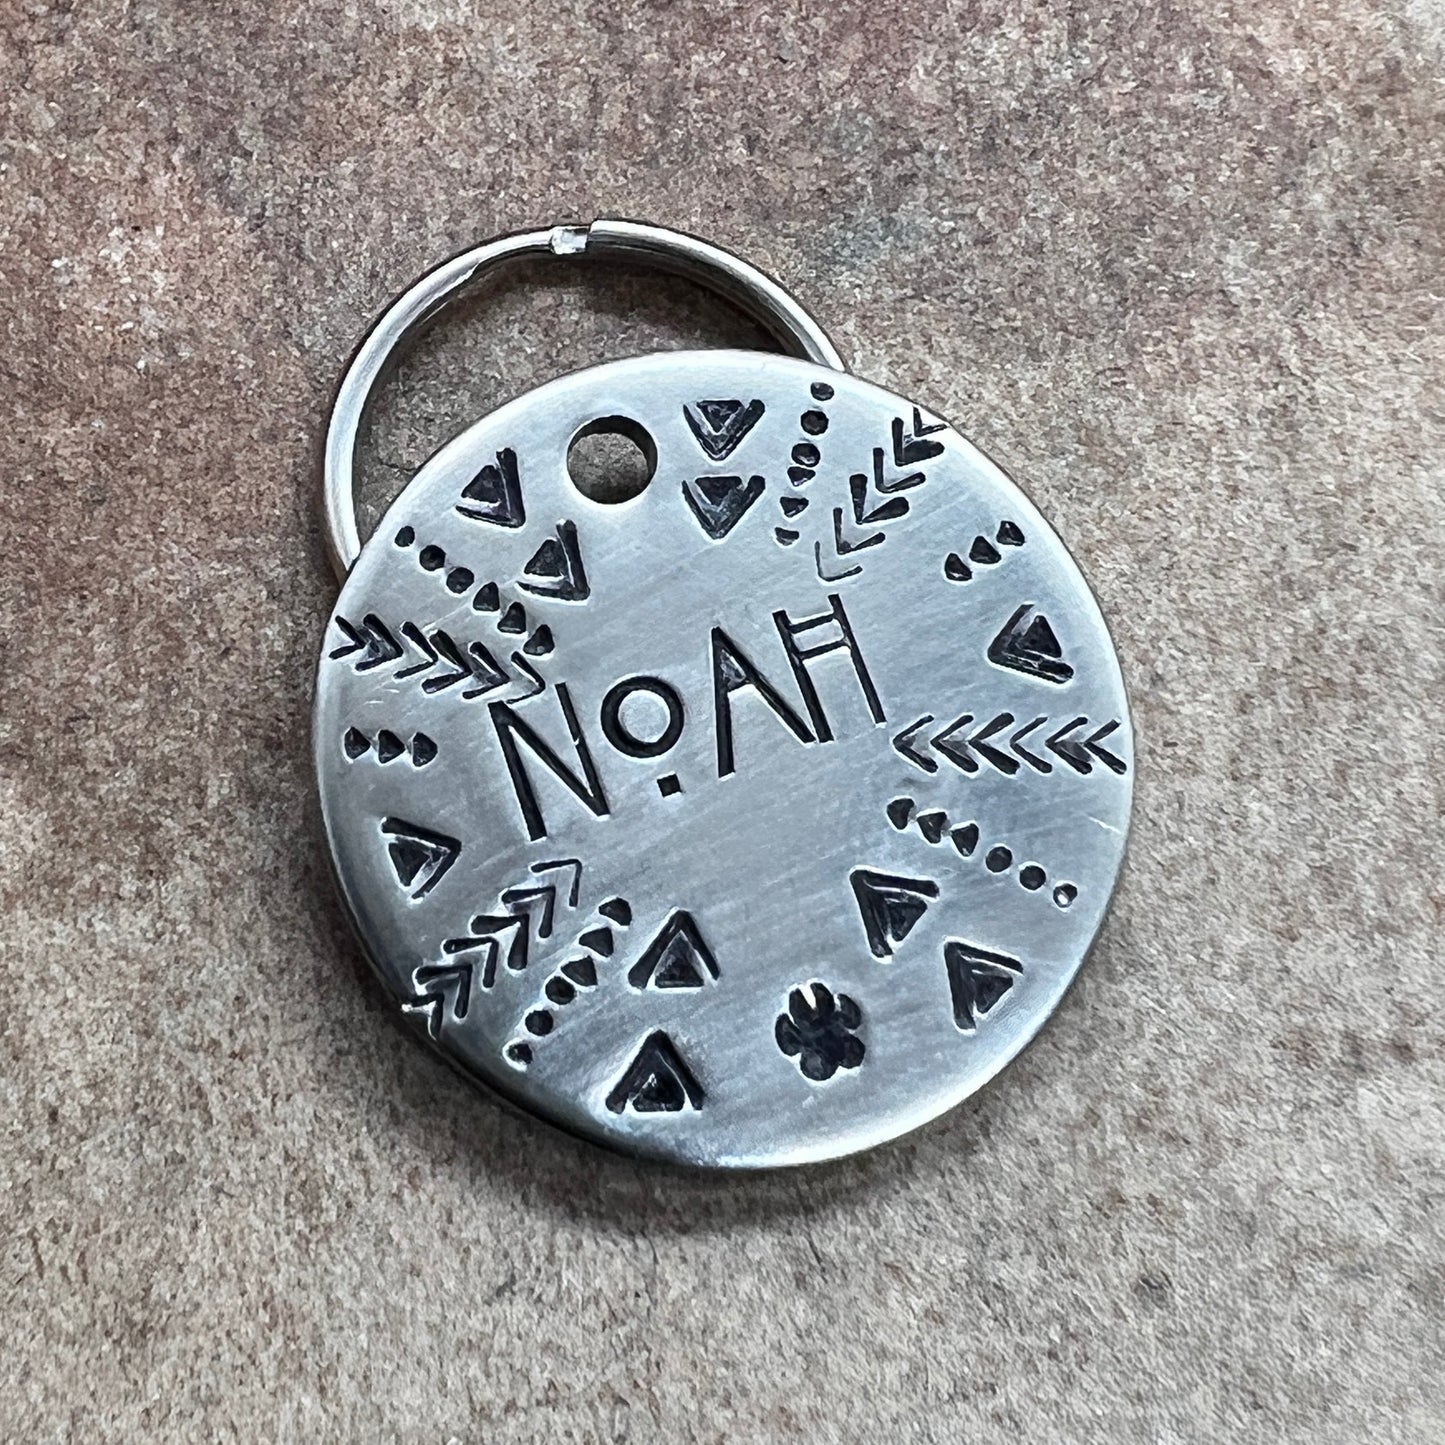 ELEMENTS design your own pet tag • Round 28mm